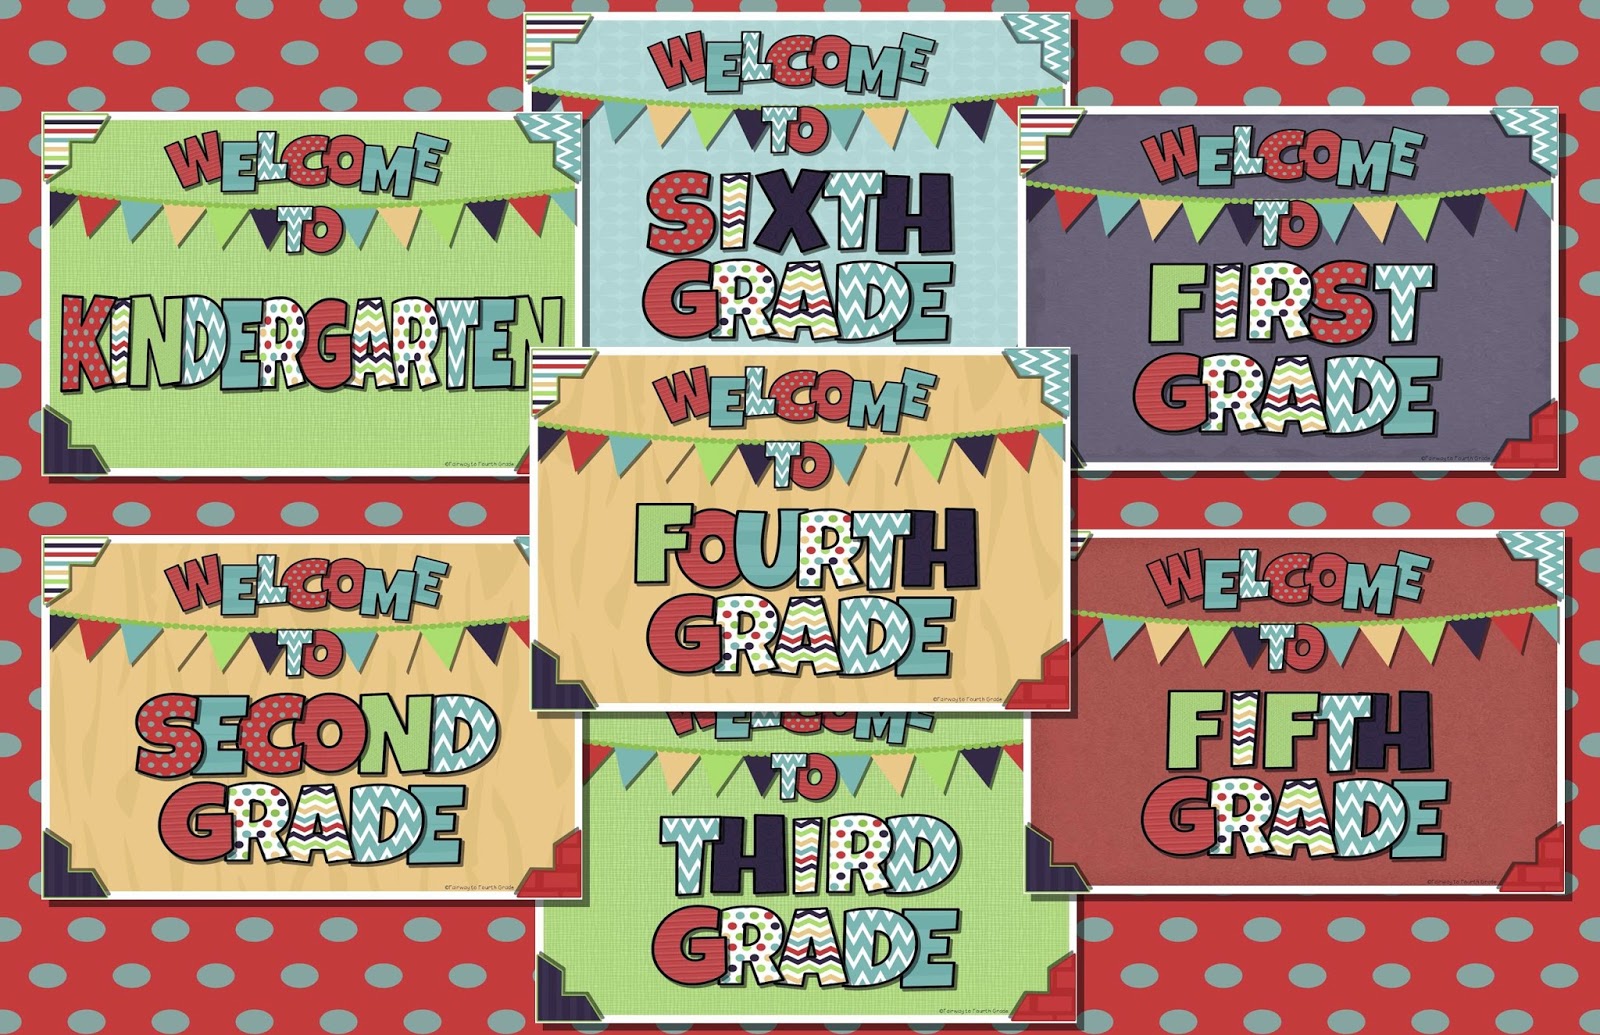 https://sites.google.com/site/fairwaytofourthgrade/Welcome%20Poster%20or%20Sign.pdf?attredirects=0&d=1